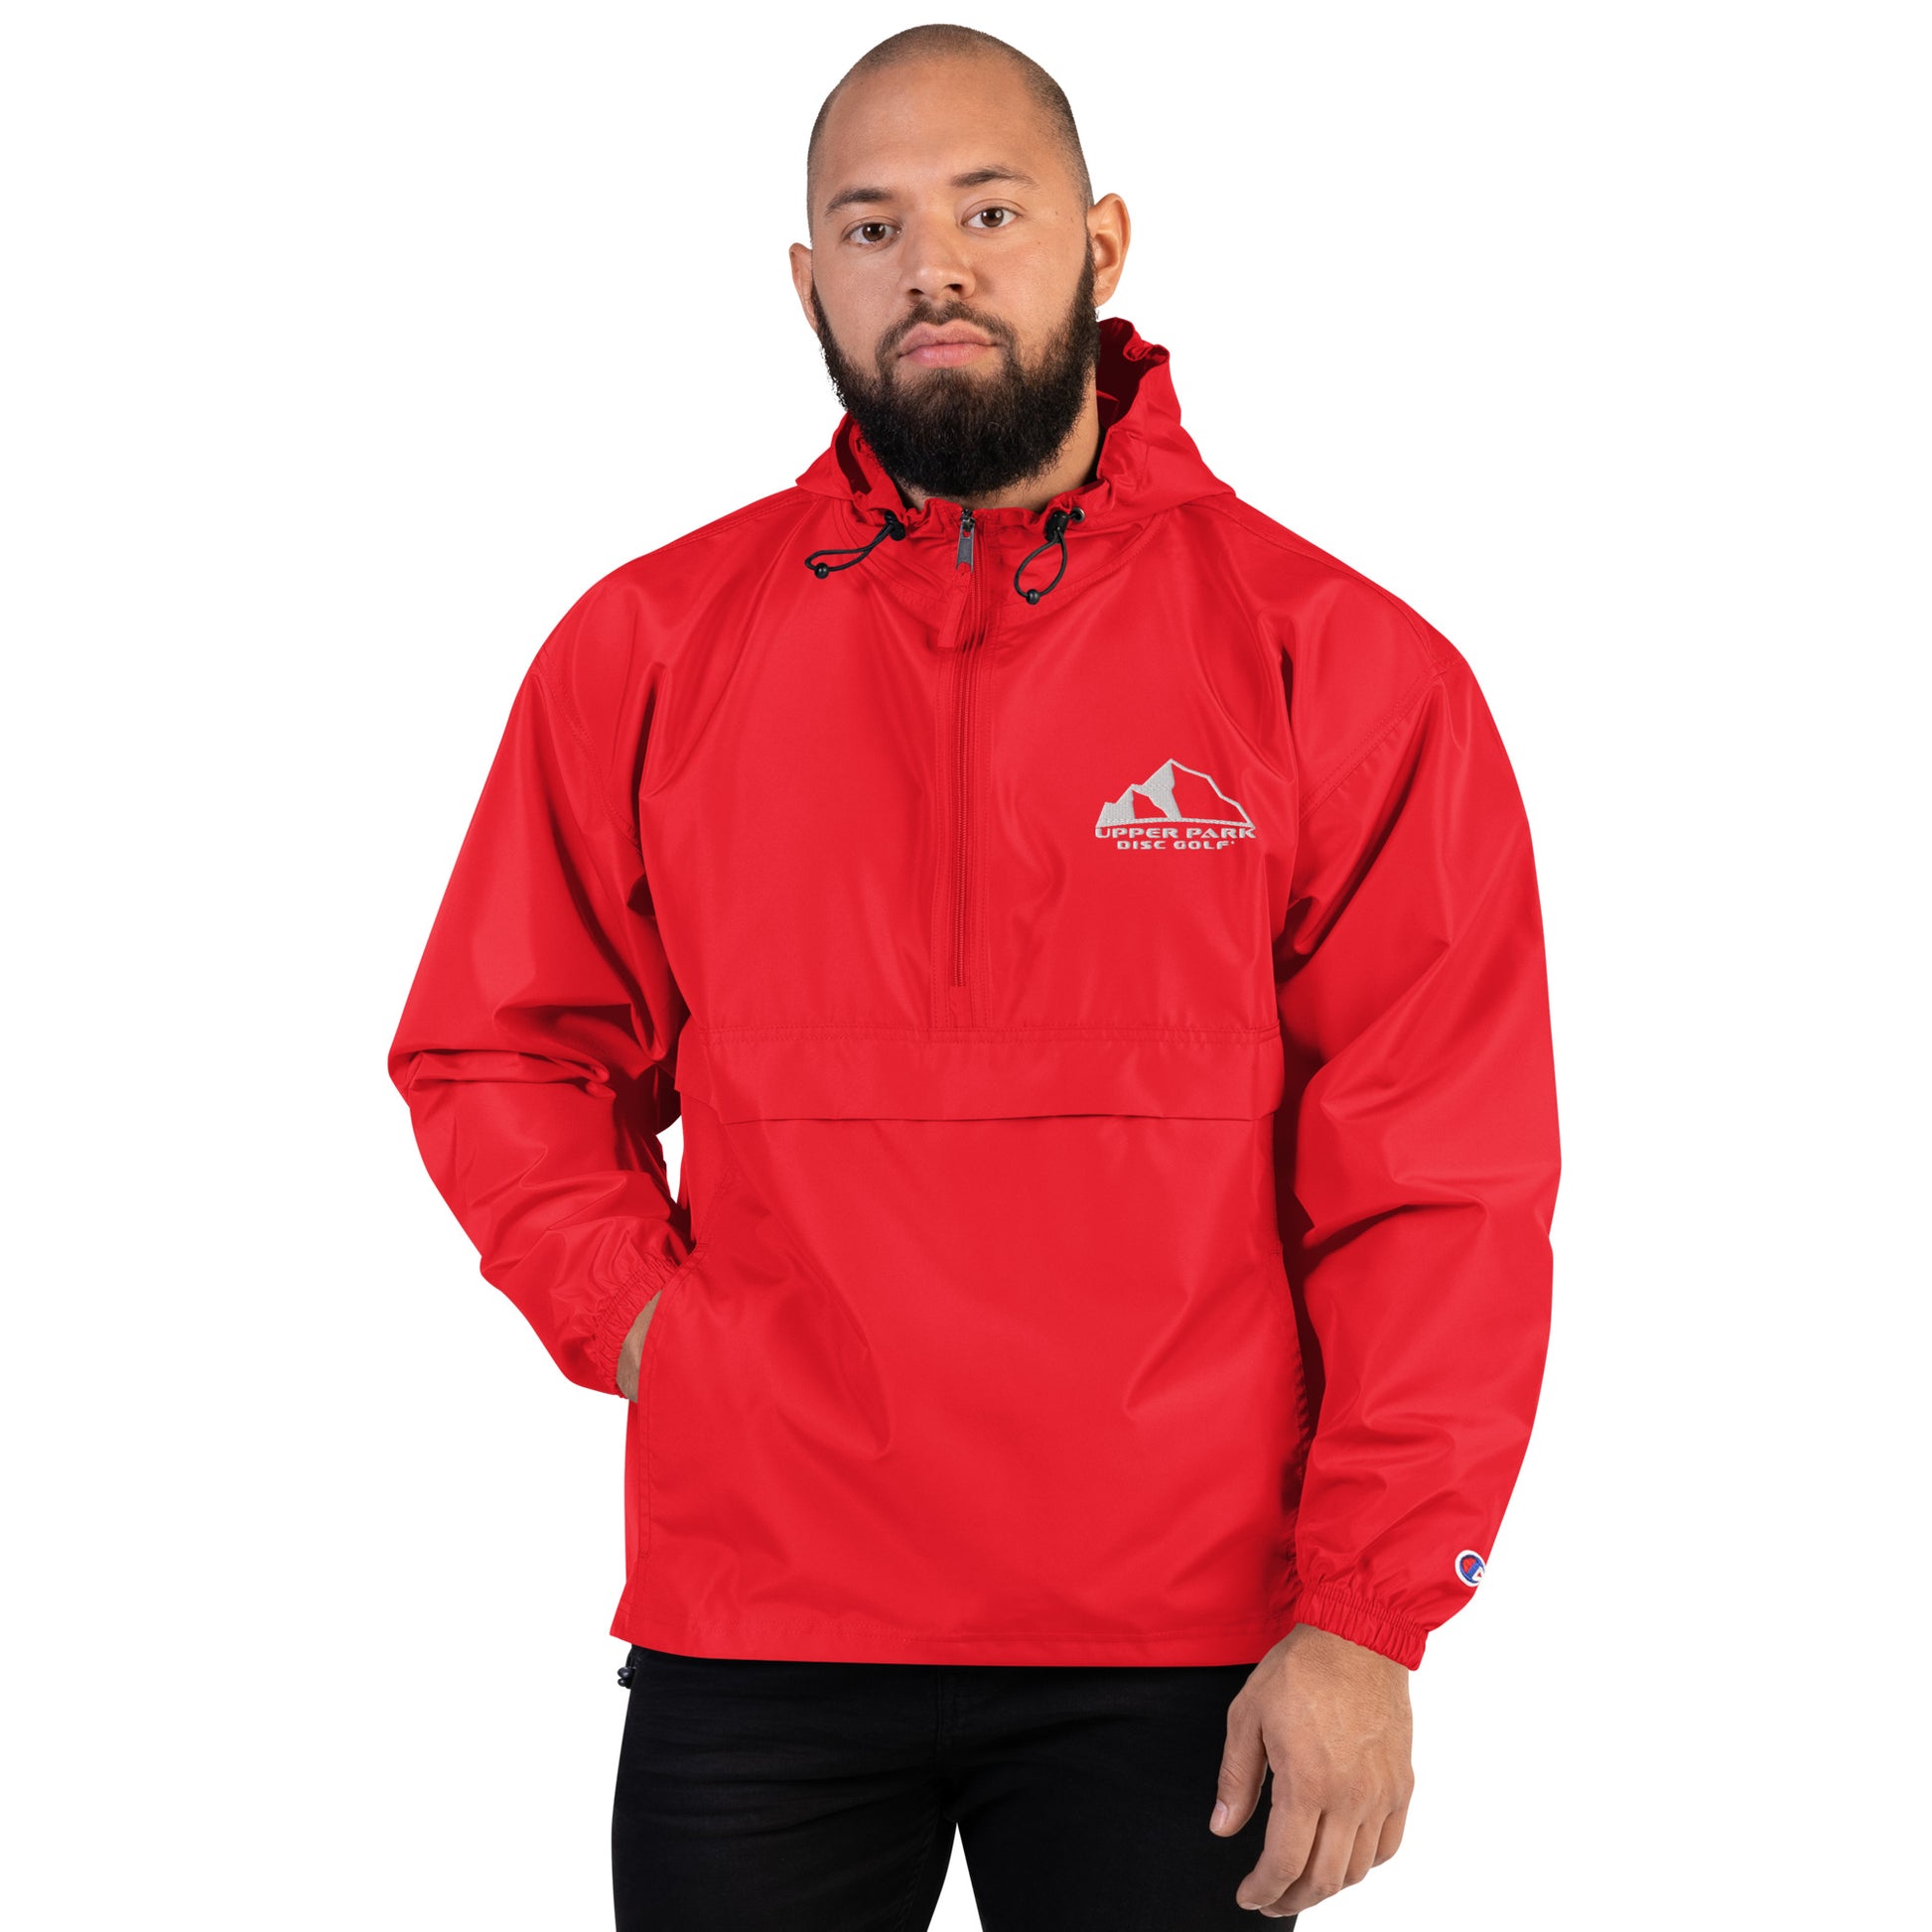 Embroidered Champion Packable Jacket with Upper Park Disc Golf® logo red